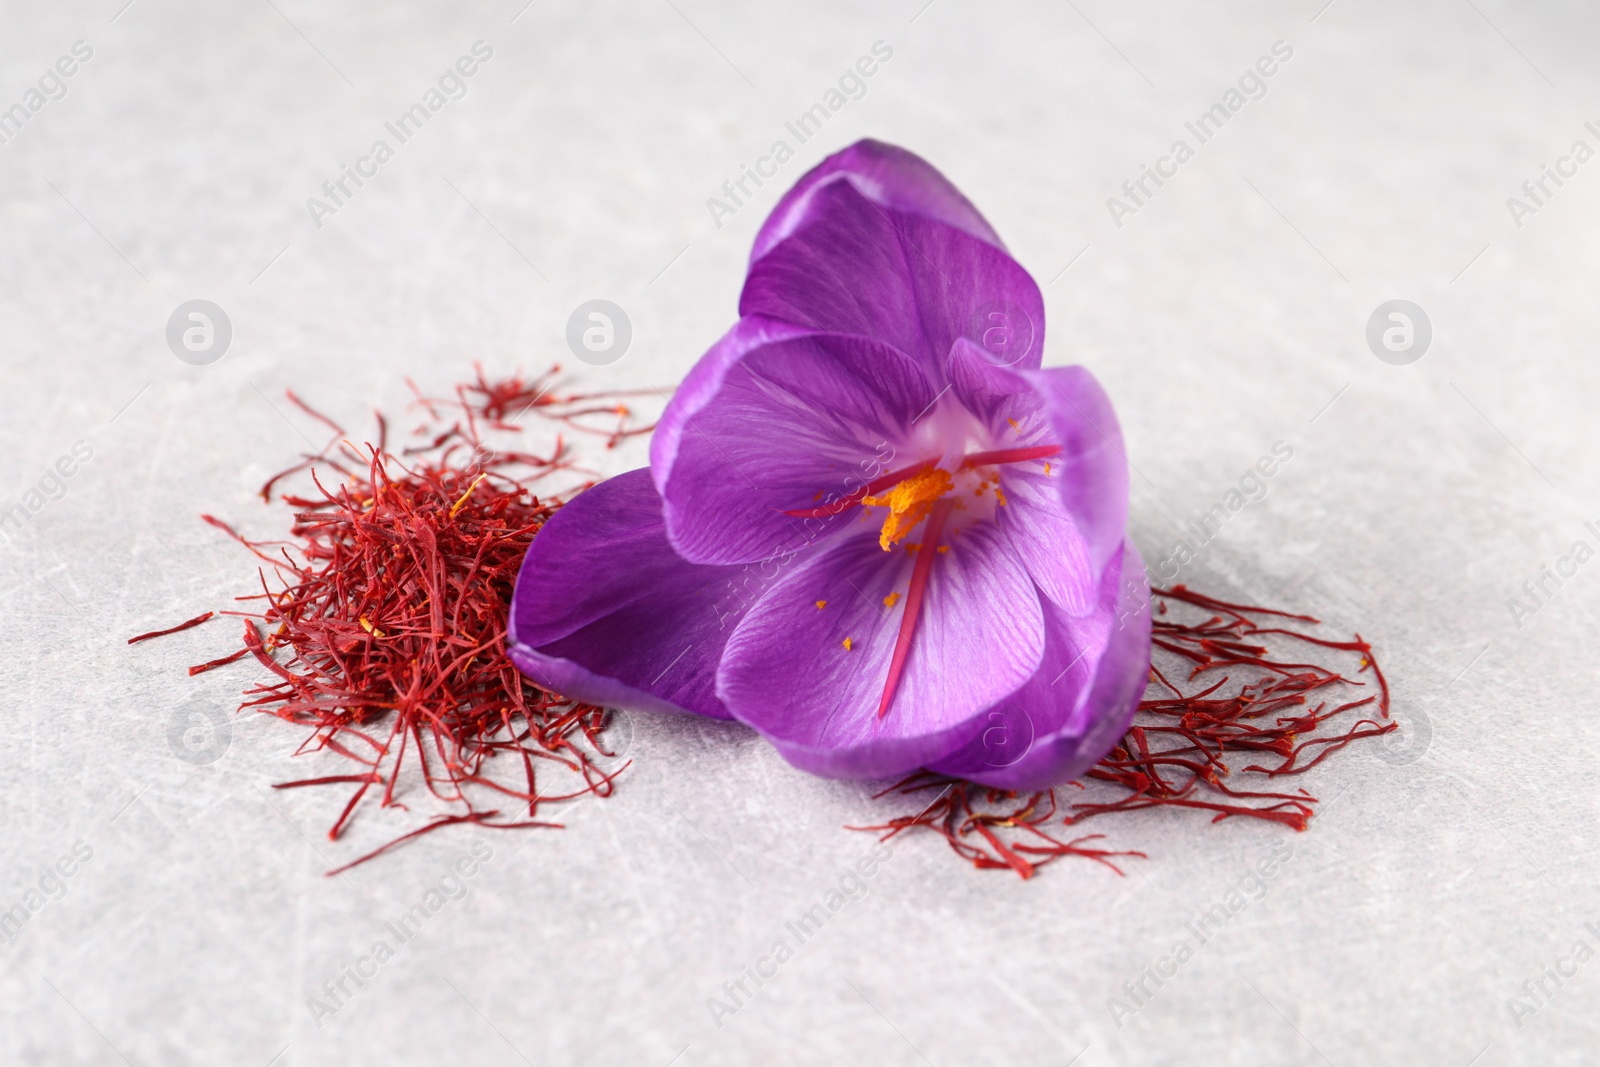 Photo of Dried saffron and crocus flower on light table